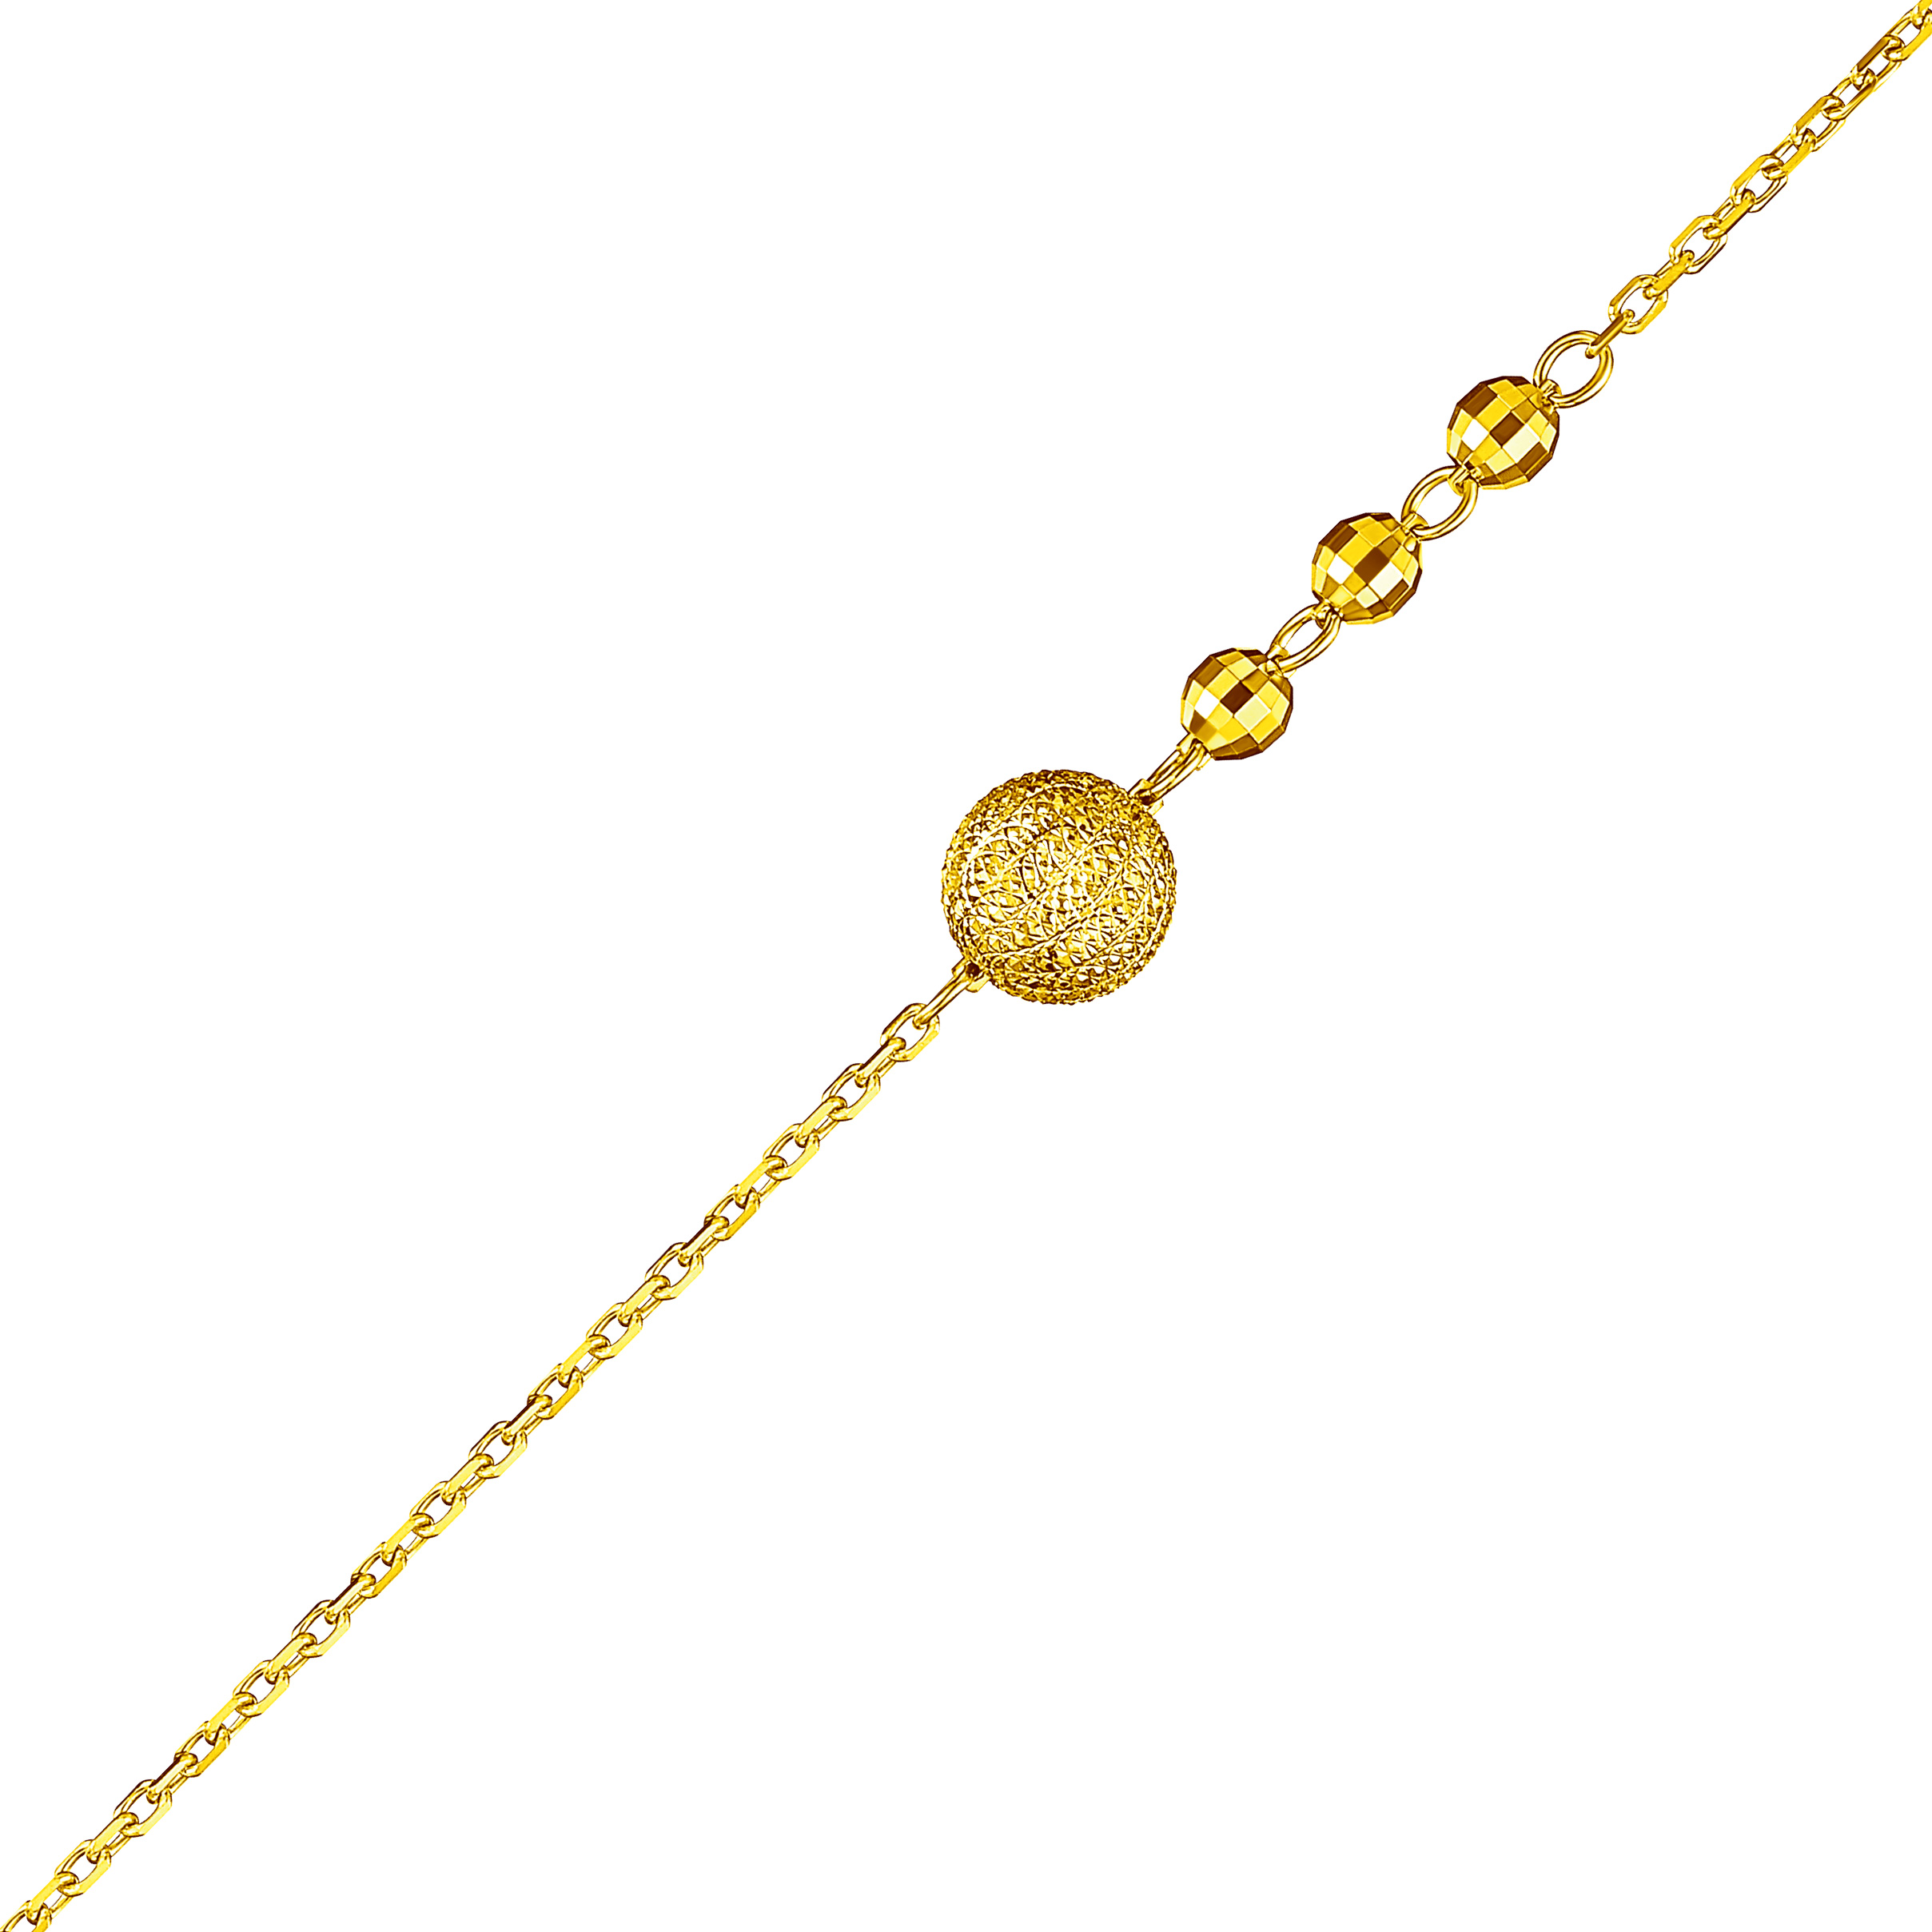 Goldstyle "Therapeutic Planet" Gold Bracelet 